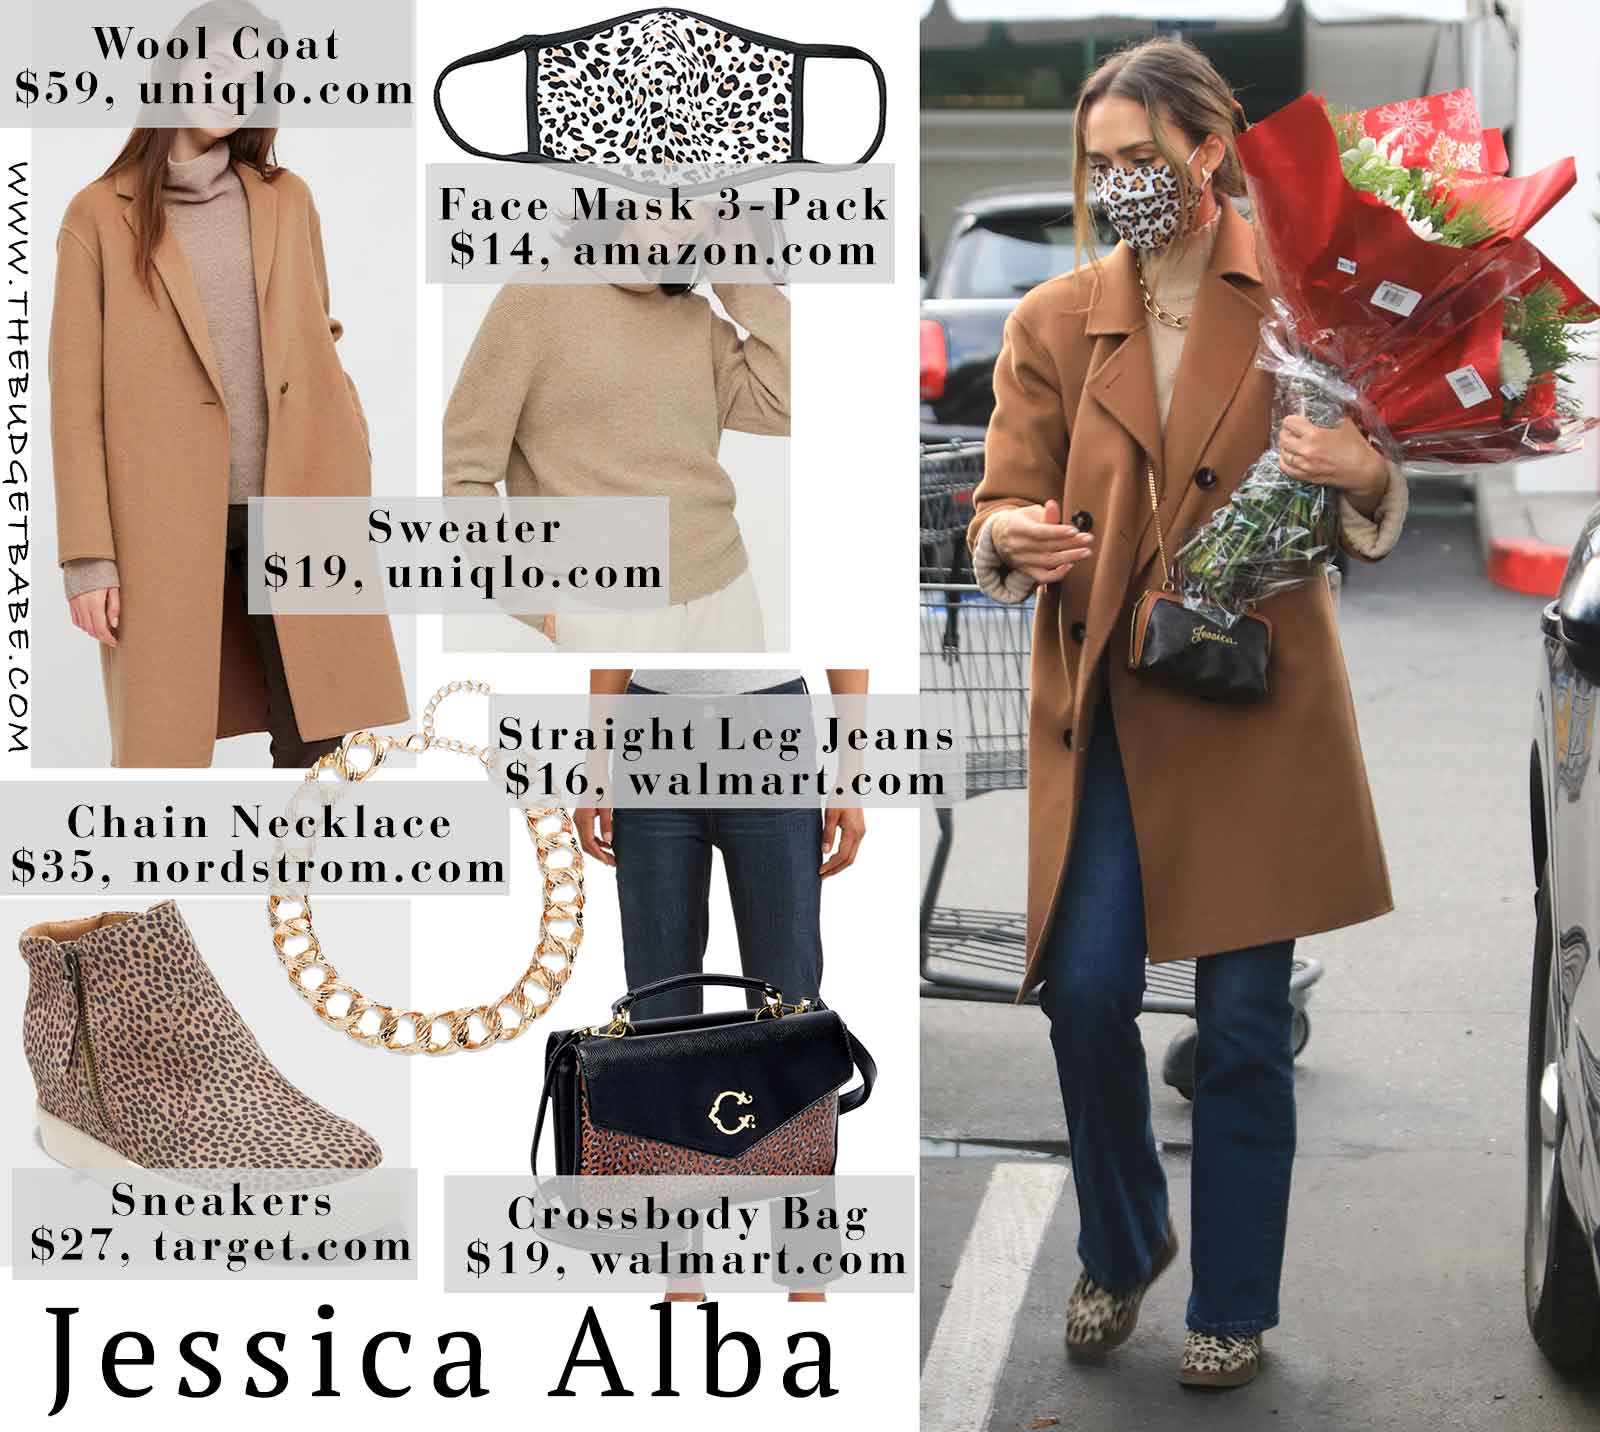 Jessica Alba's leopard face mask, camel coat and straight leg jeans look for less